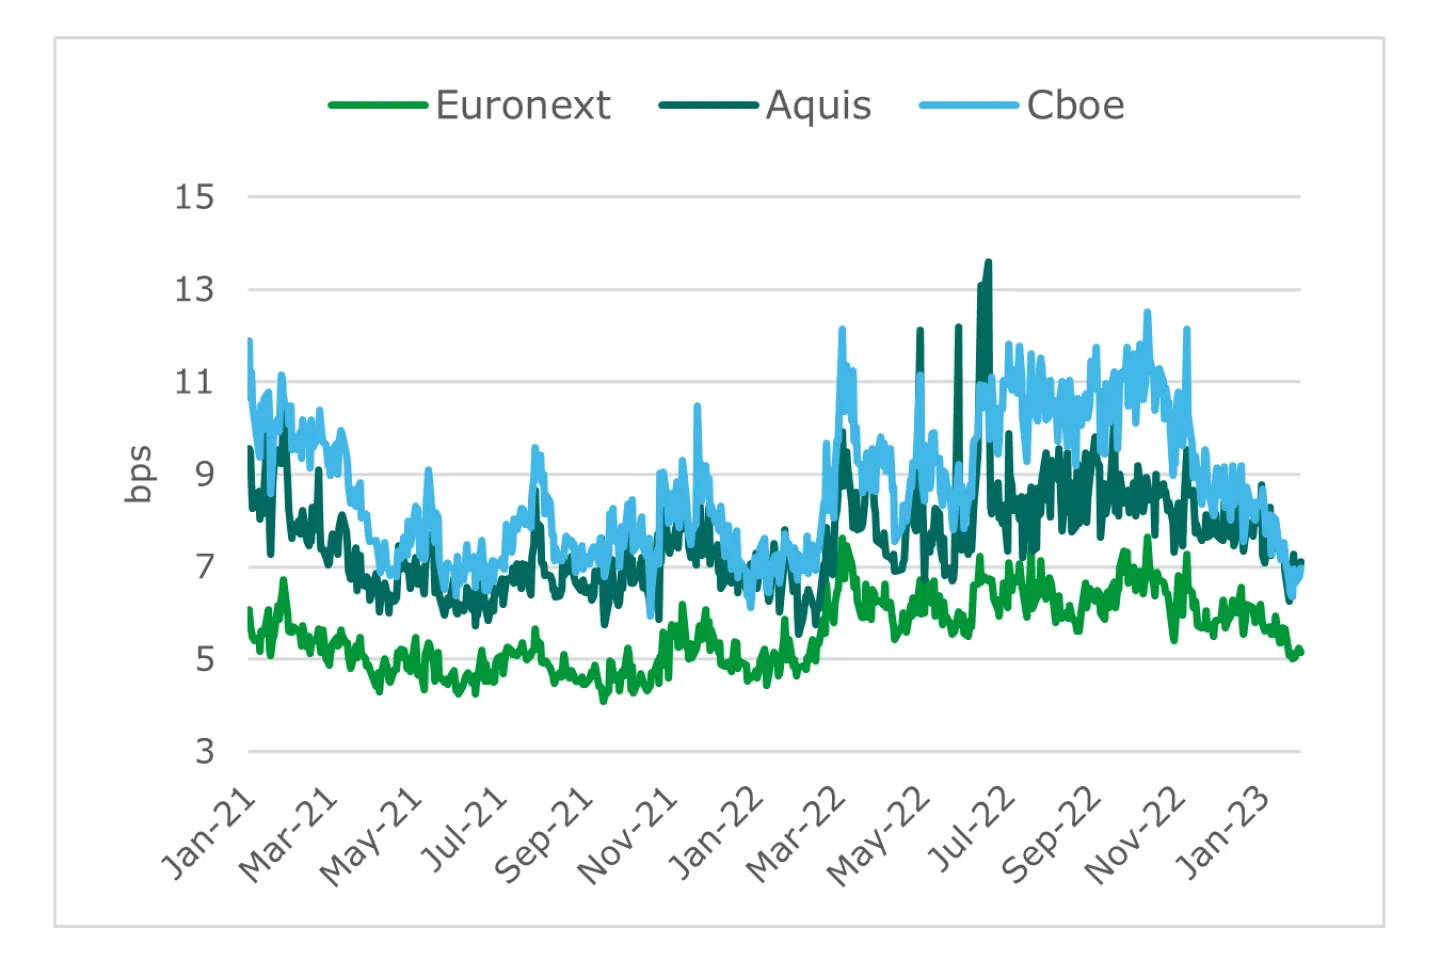 Spread at 10K Depth (in bps)*: Euronext better than Aquis and Cboe